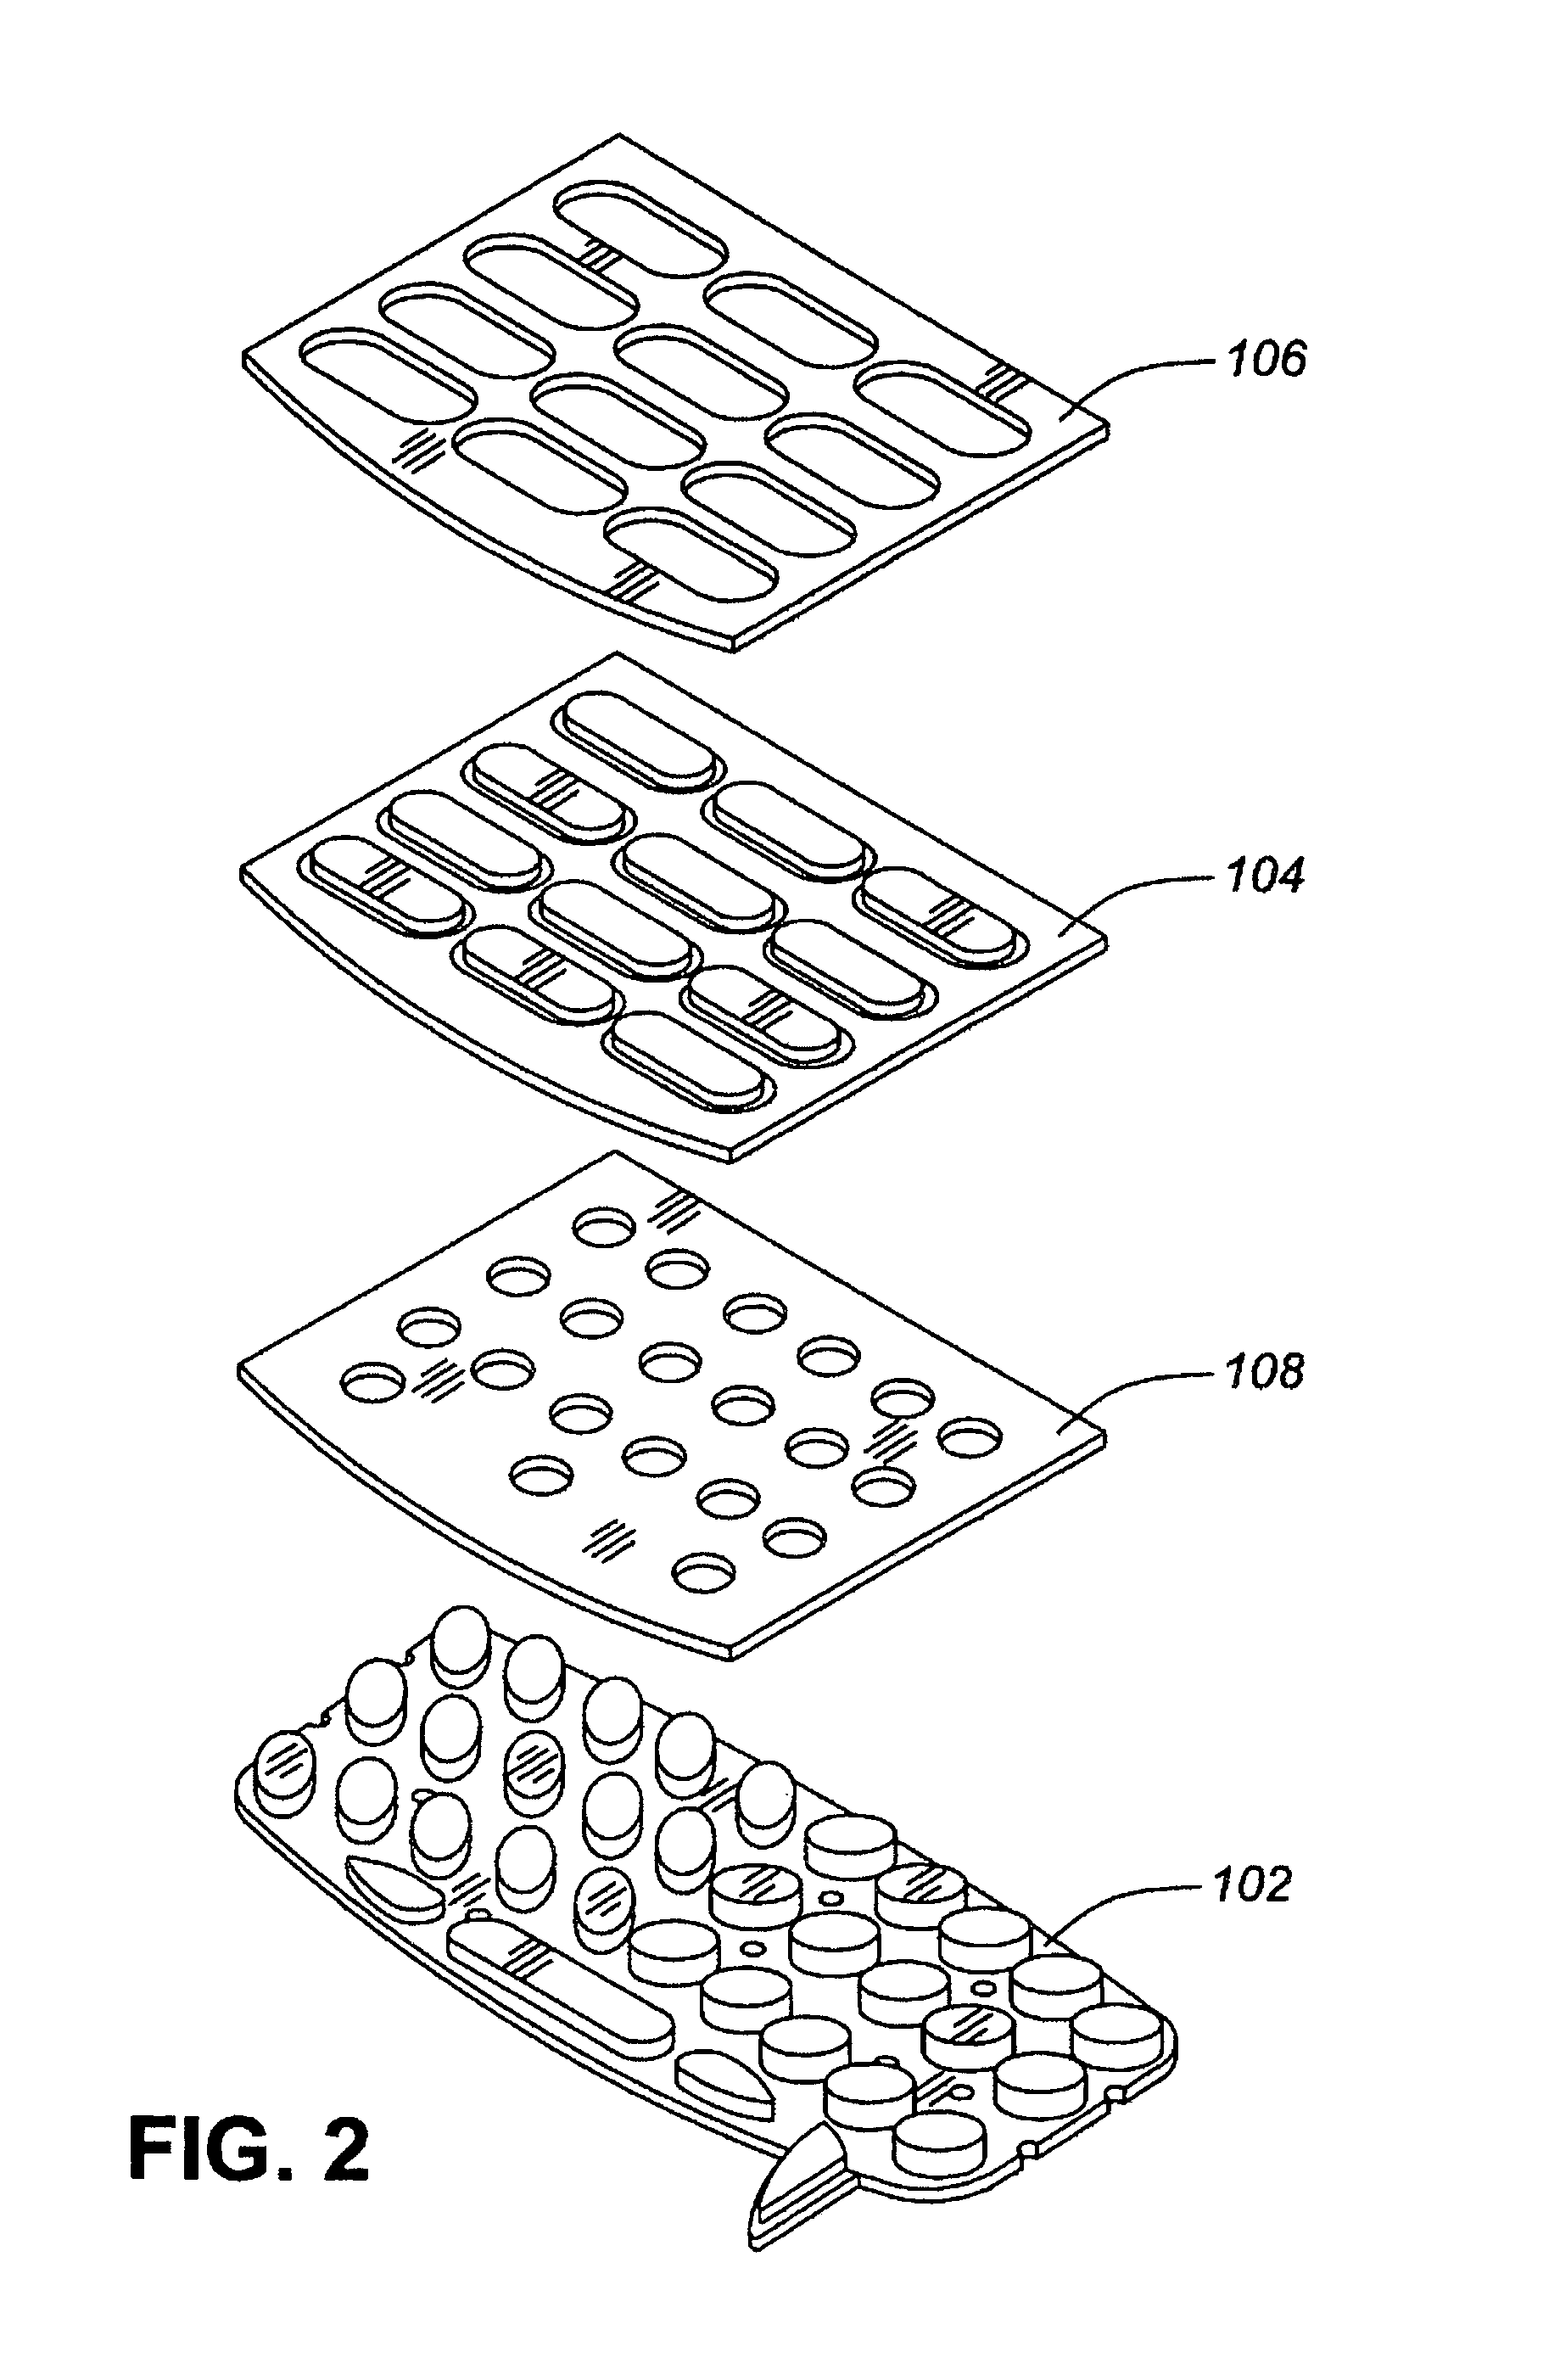 Cover plate for a mobile device having a push-through dial keypad